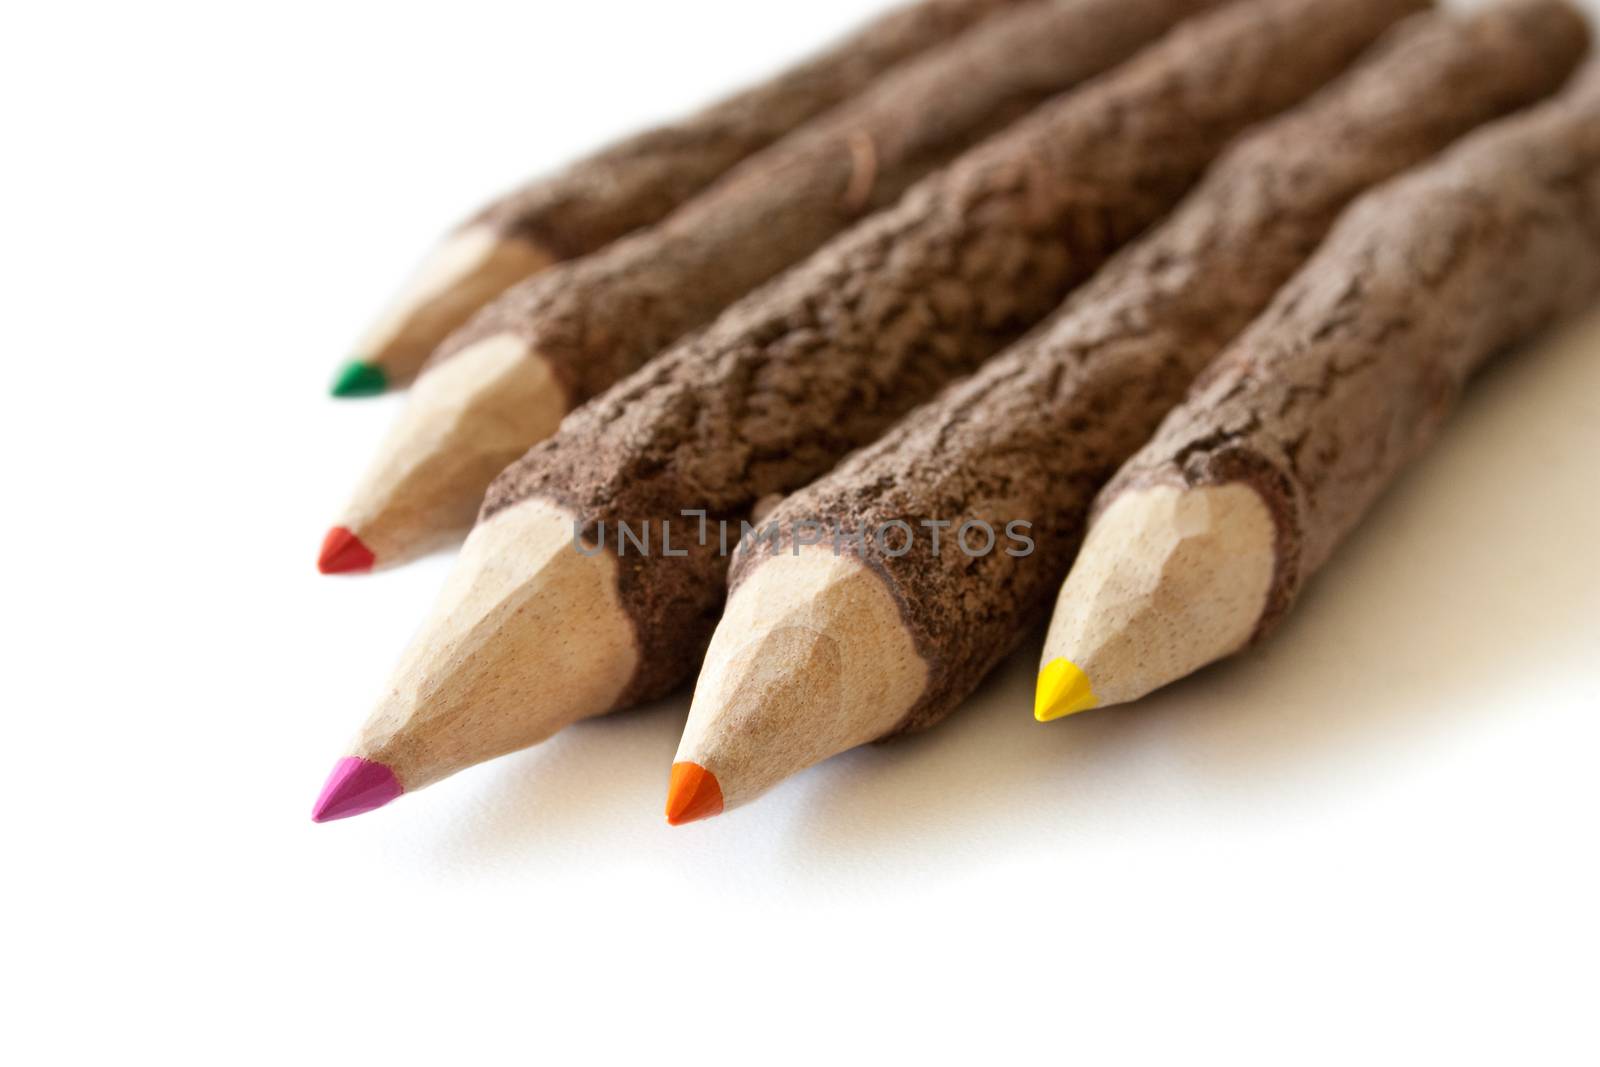 Colored pencils by evdayan